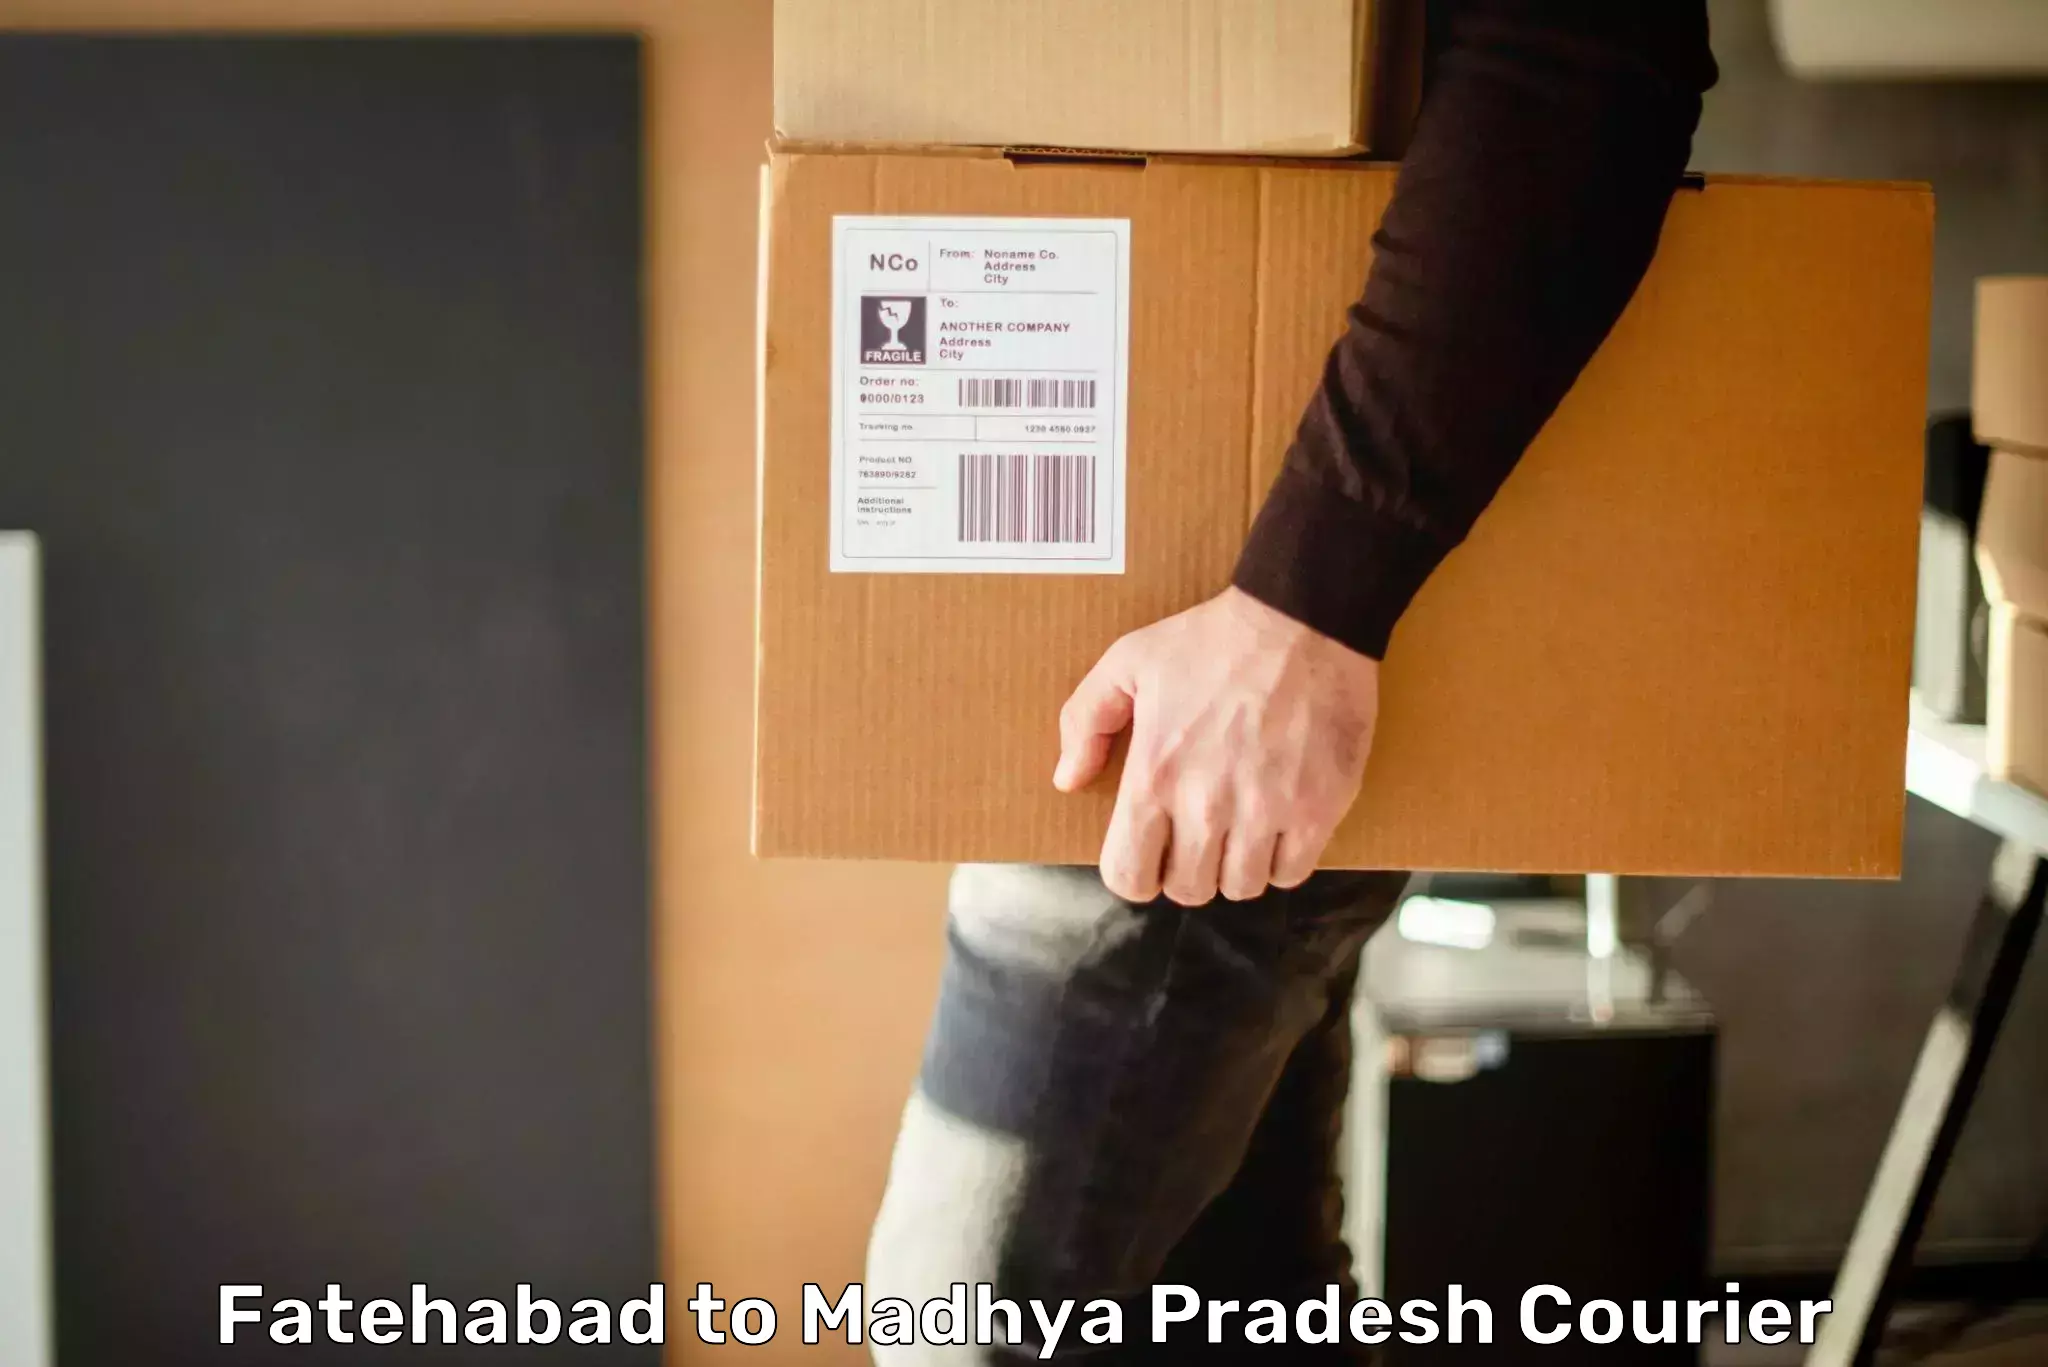 Courier service efficiency Fatehabad to Bichhiya